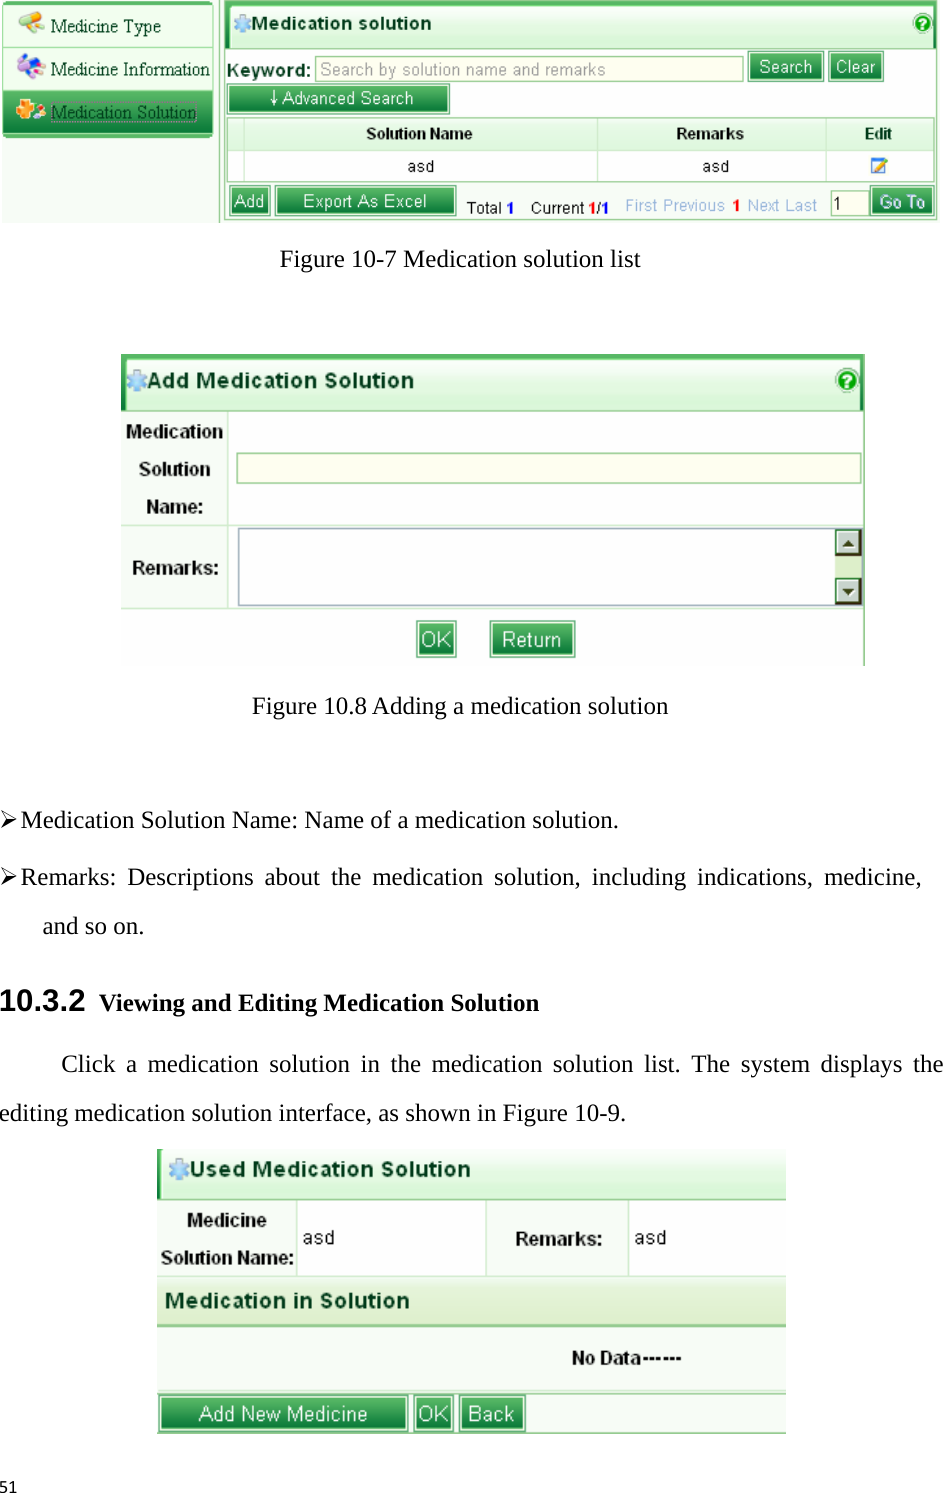 51 Figure 10-7 Medication solution list     Figure 10.8 Adding a medication solution  ¾ Medication Solution Name: Name of a medication solution. ¾ Remarks: Descriptions about the medication solution, including indications, medicine, and so on. 10.3.2   Viewing and Editing Medication Solution Click a medication solution in the medication solution list. The system displays the editing medication solution interface, as shown in Figure 10-9.    